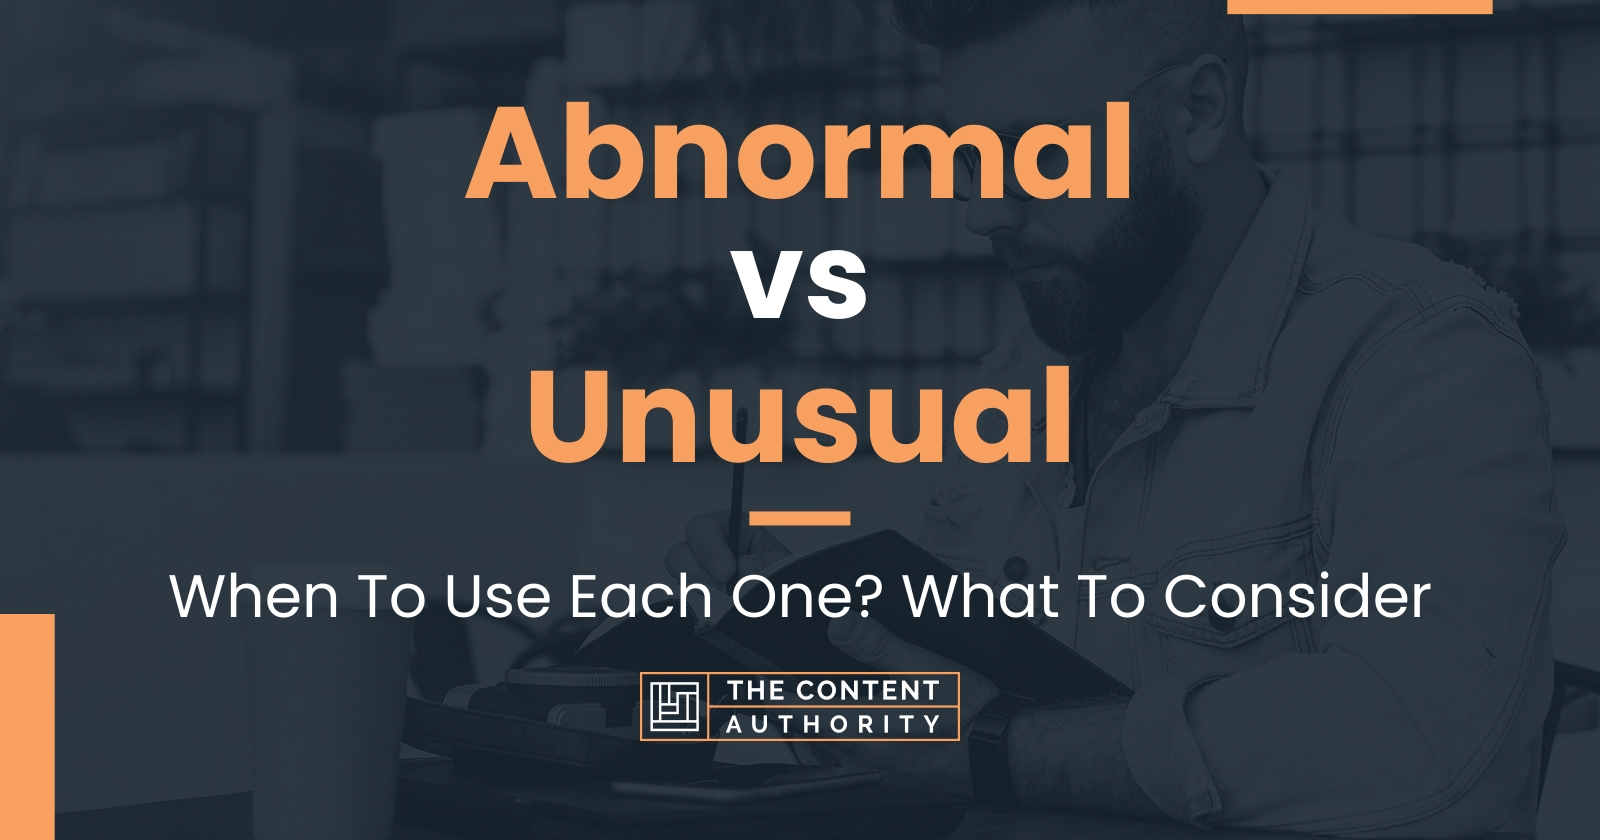 Abnormal vs Unusual: When To Use Each One? What To Consider